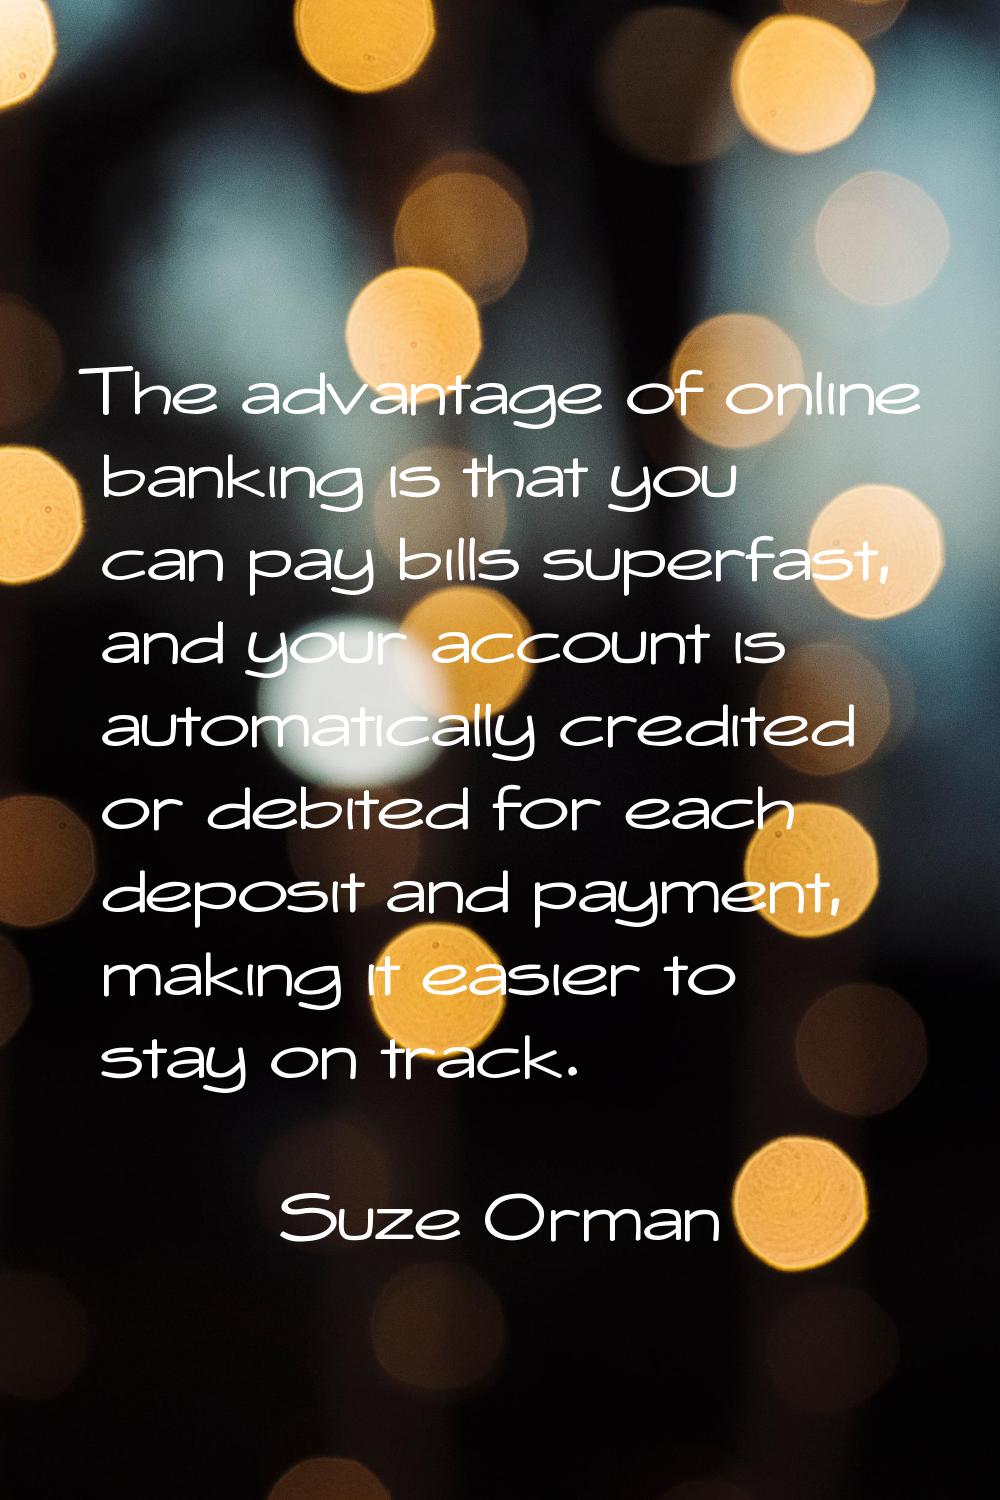 The advantage of online banking is that you can pay bills superfast, and your account is automatica